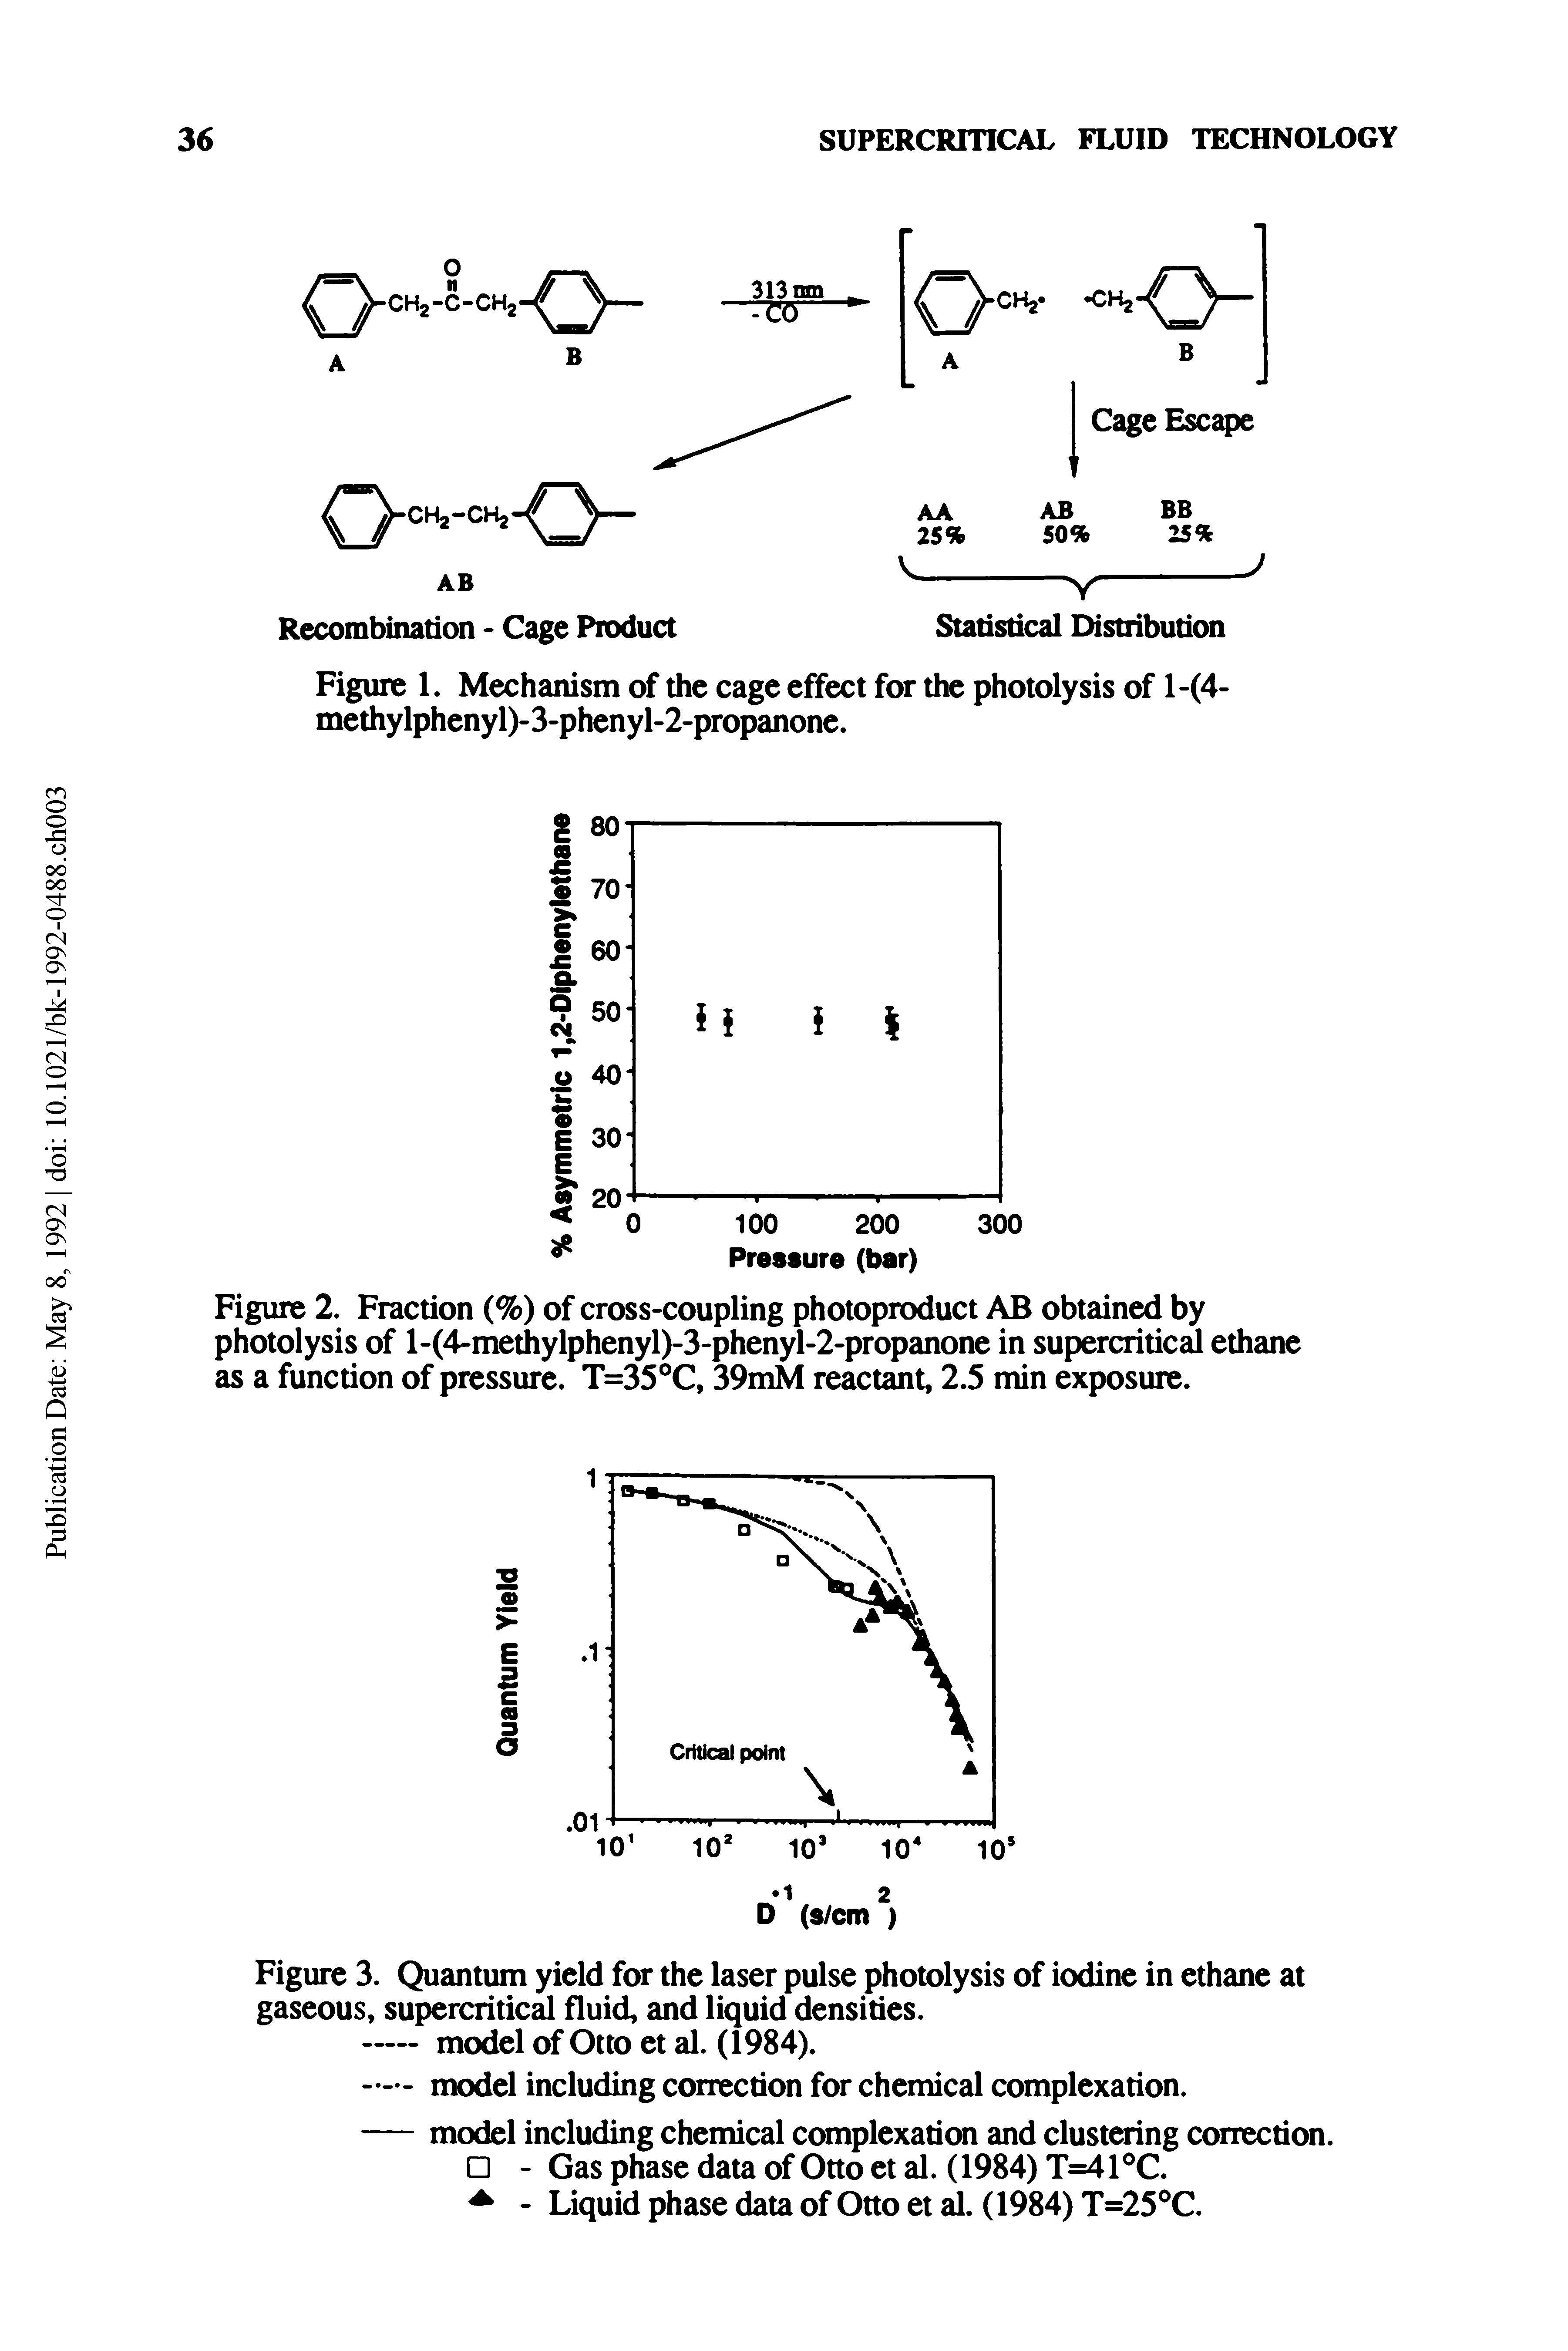 Figure 2. Fraction (%) of cross-coupling photoproduct AB obtained by photolysis of l-(4-methylphenyl)-3-phenyl-2-propanone in supercritical ethane as a function of pressure. T=35°C, 39mM reactant, 2.5 min exposure.